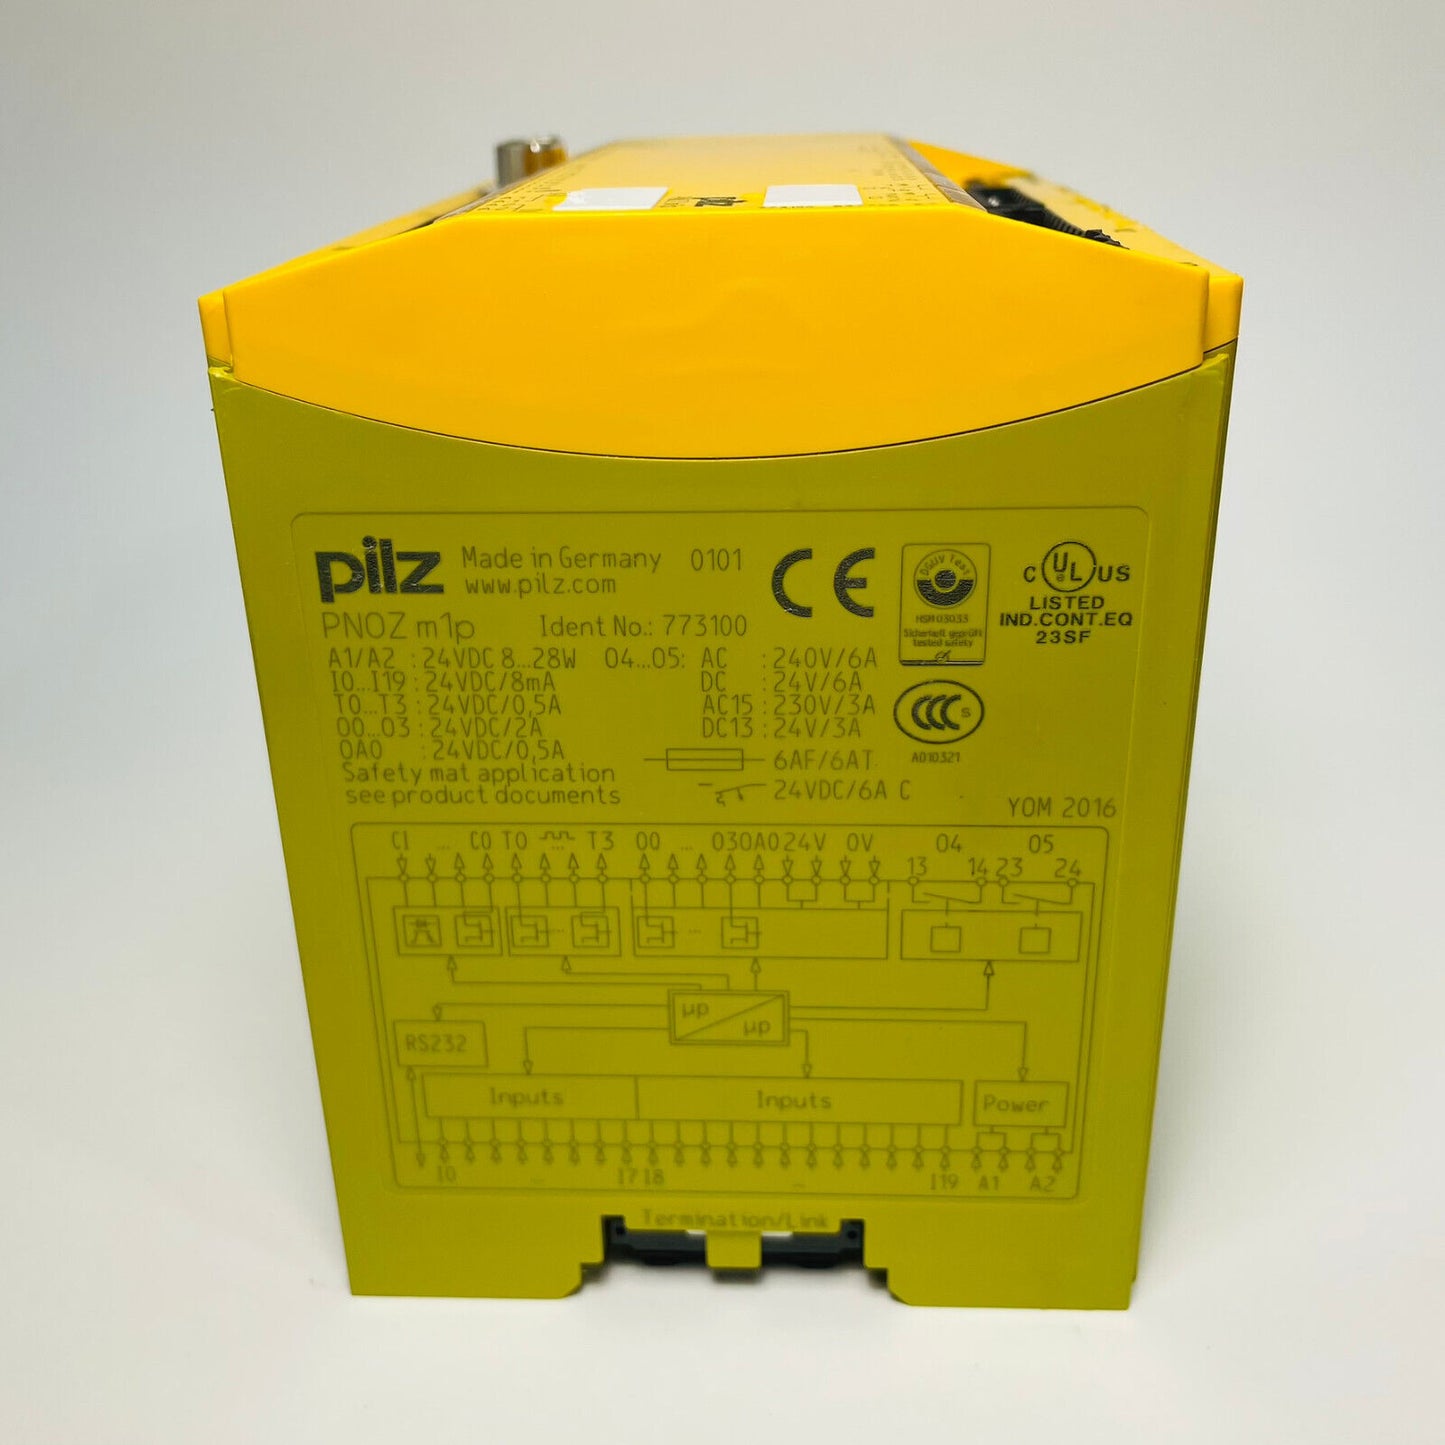 New Pilz PNOZ m1p 773100 Safety Relay Module,